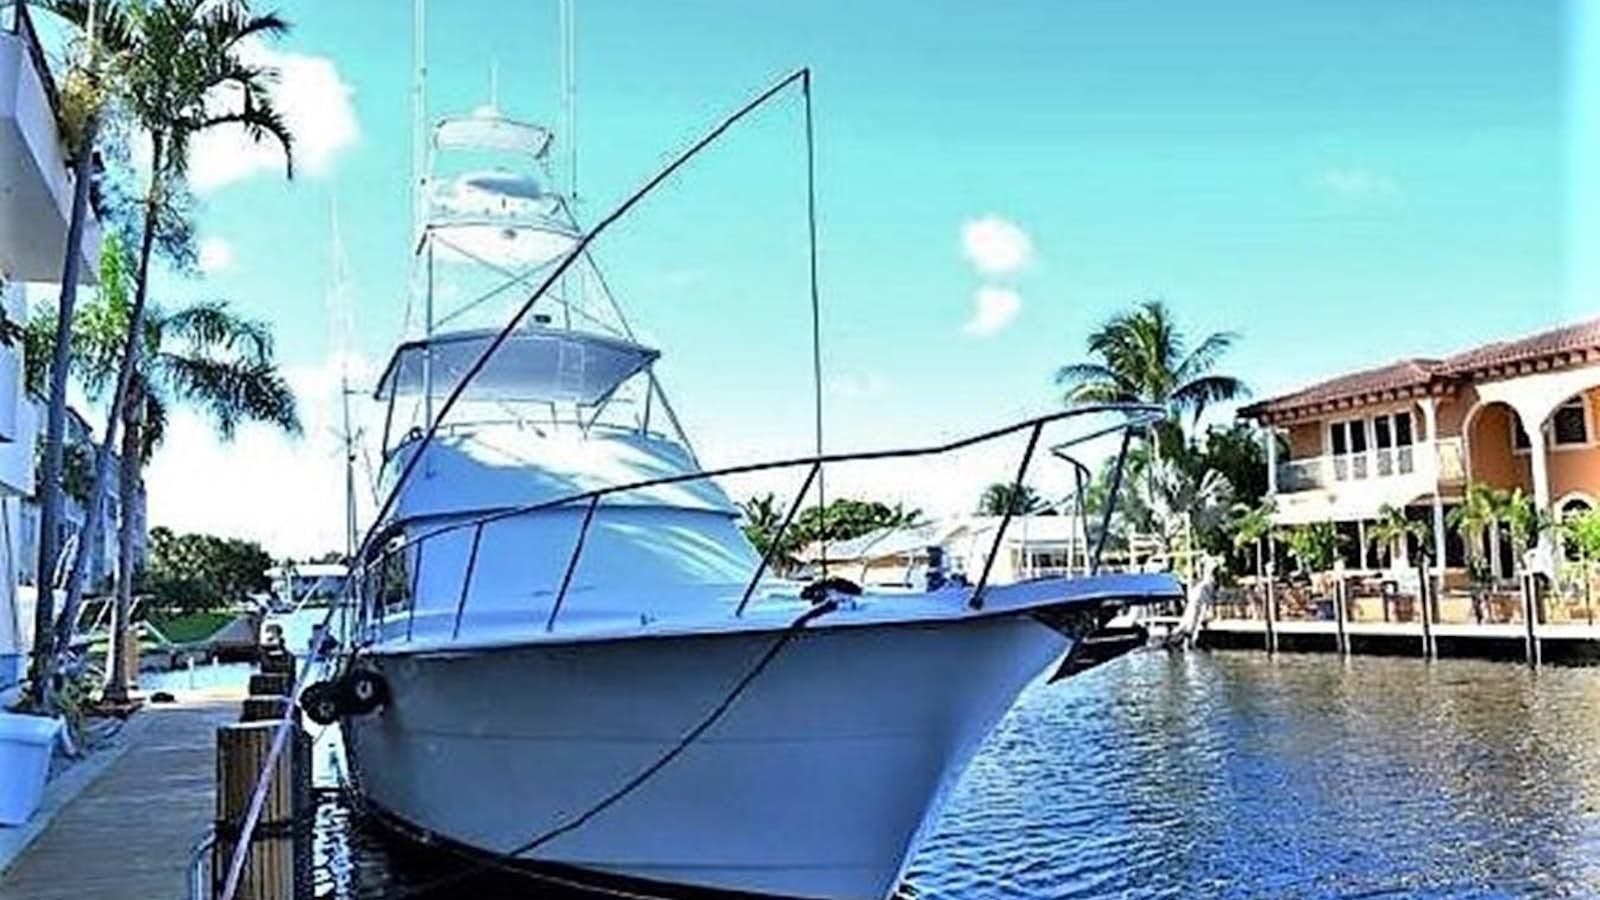 Renegade
Yacht for Sale